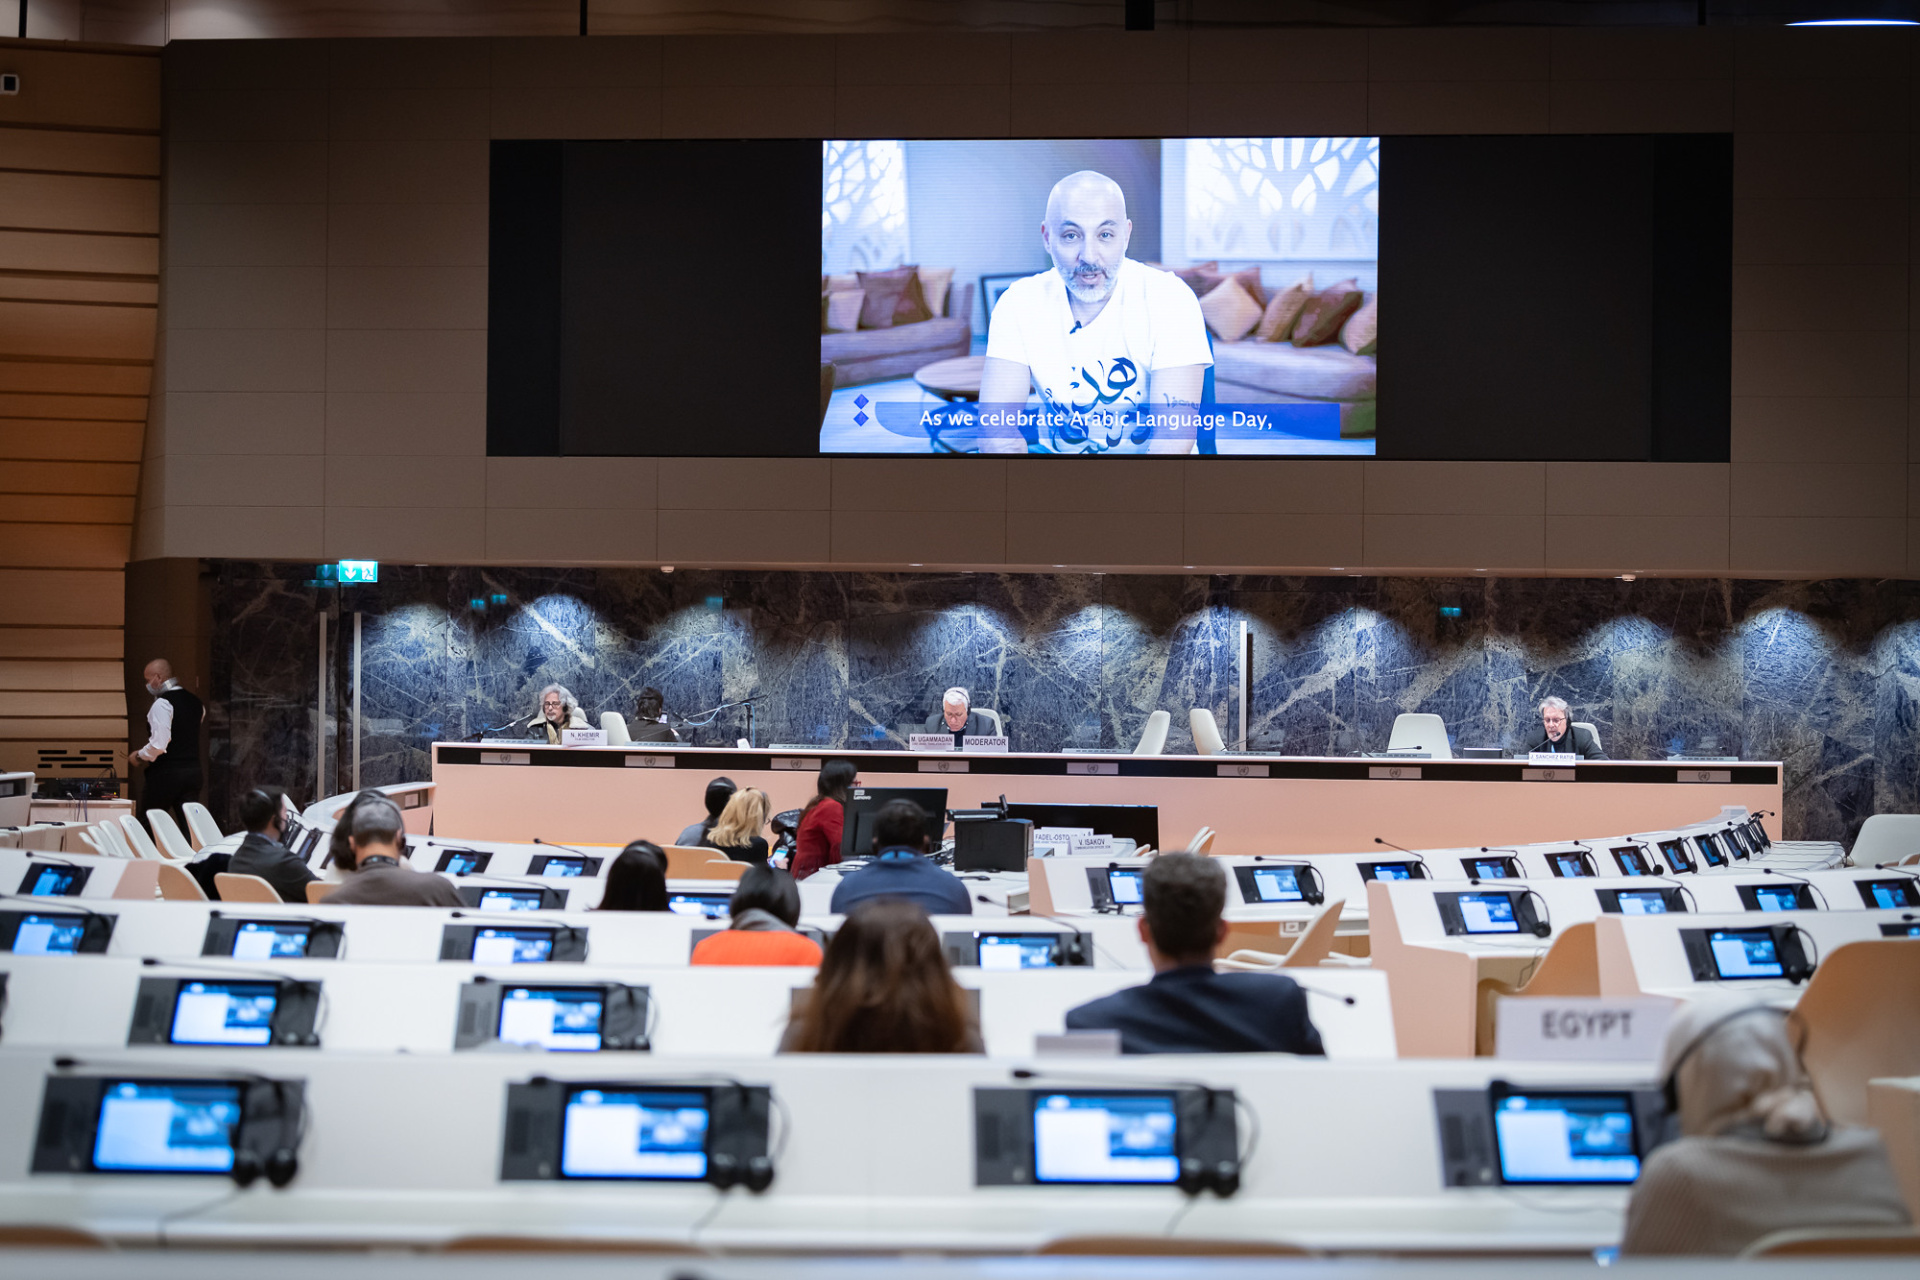 A group of people sitting inside a UN conference room with their backs to the camera, facing a podium of speakers and a video screen which displays a speaking man.